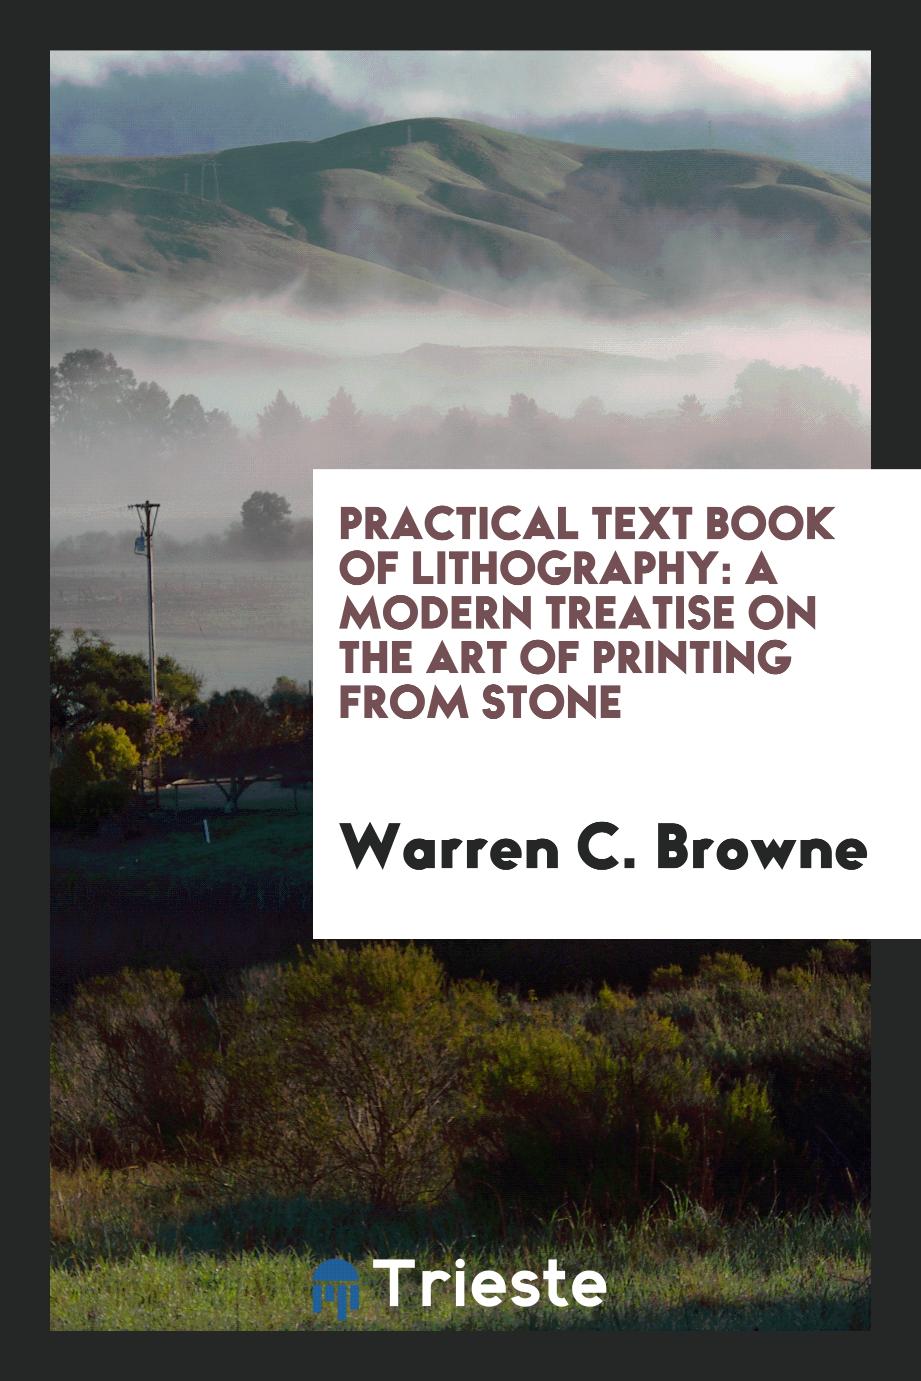 Practical text book of lithography: a modern treatise on the art of printing from stone